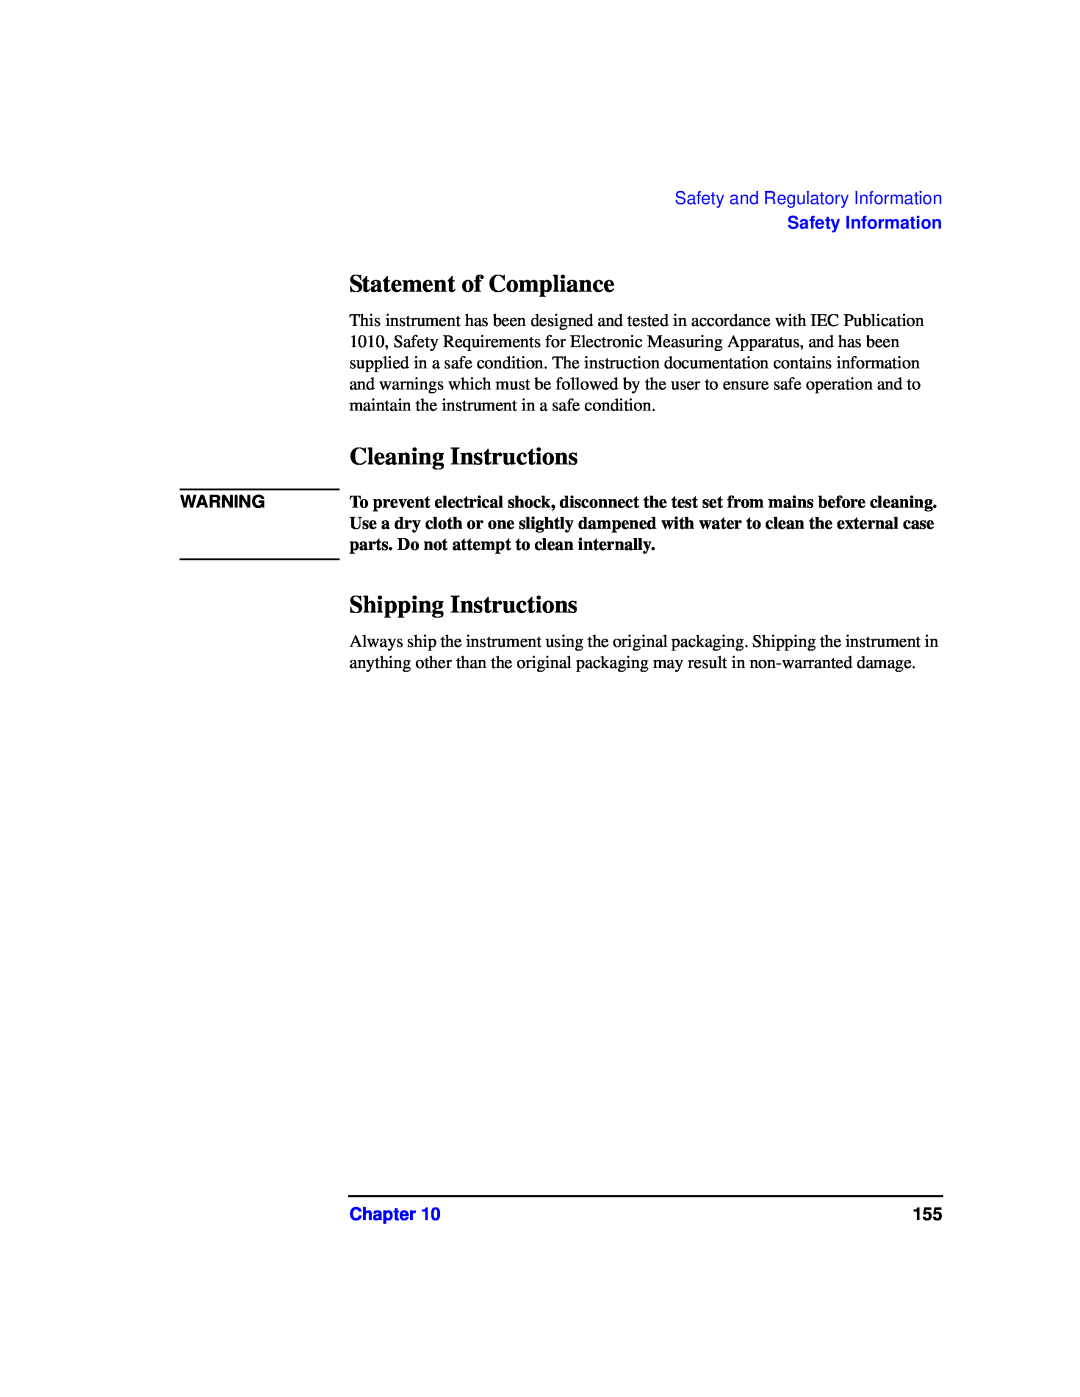 Agilent Technologies 87075C Statement of Compliance, Cleaning Instructions, Shipping Instructions, Safety Information 